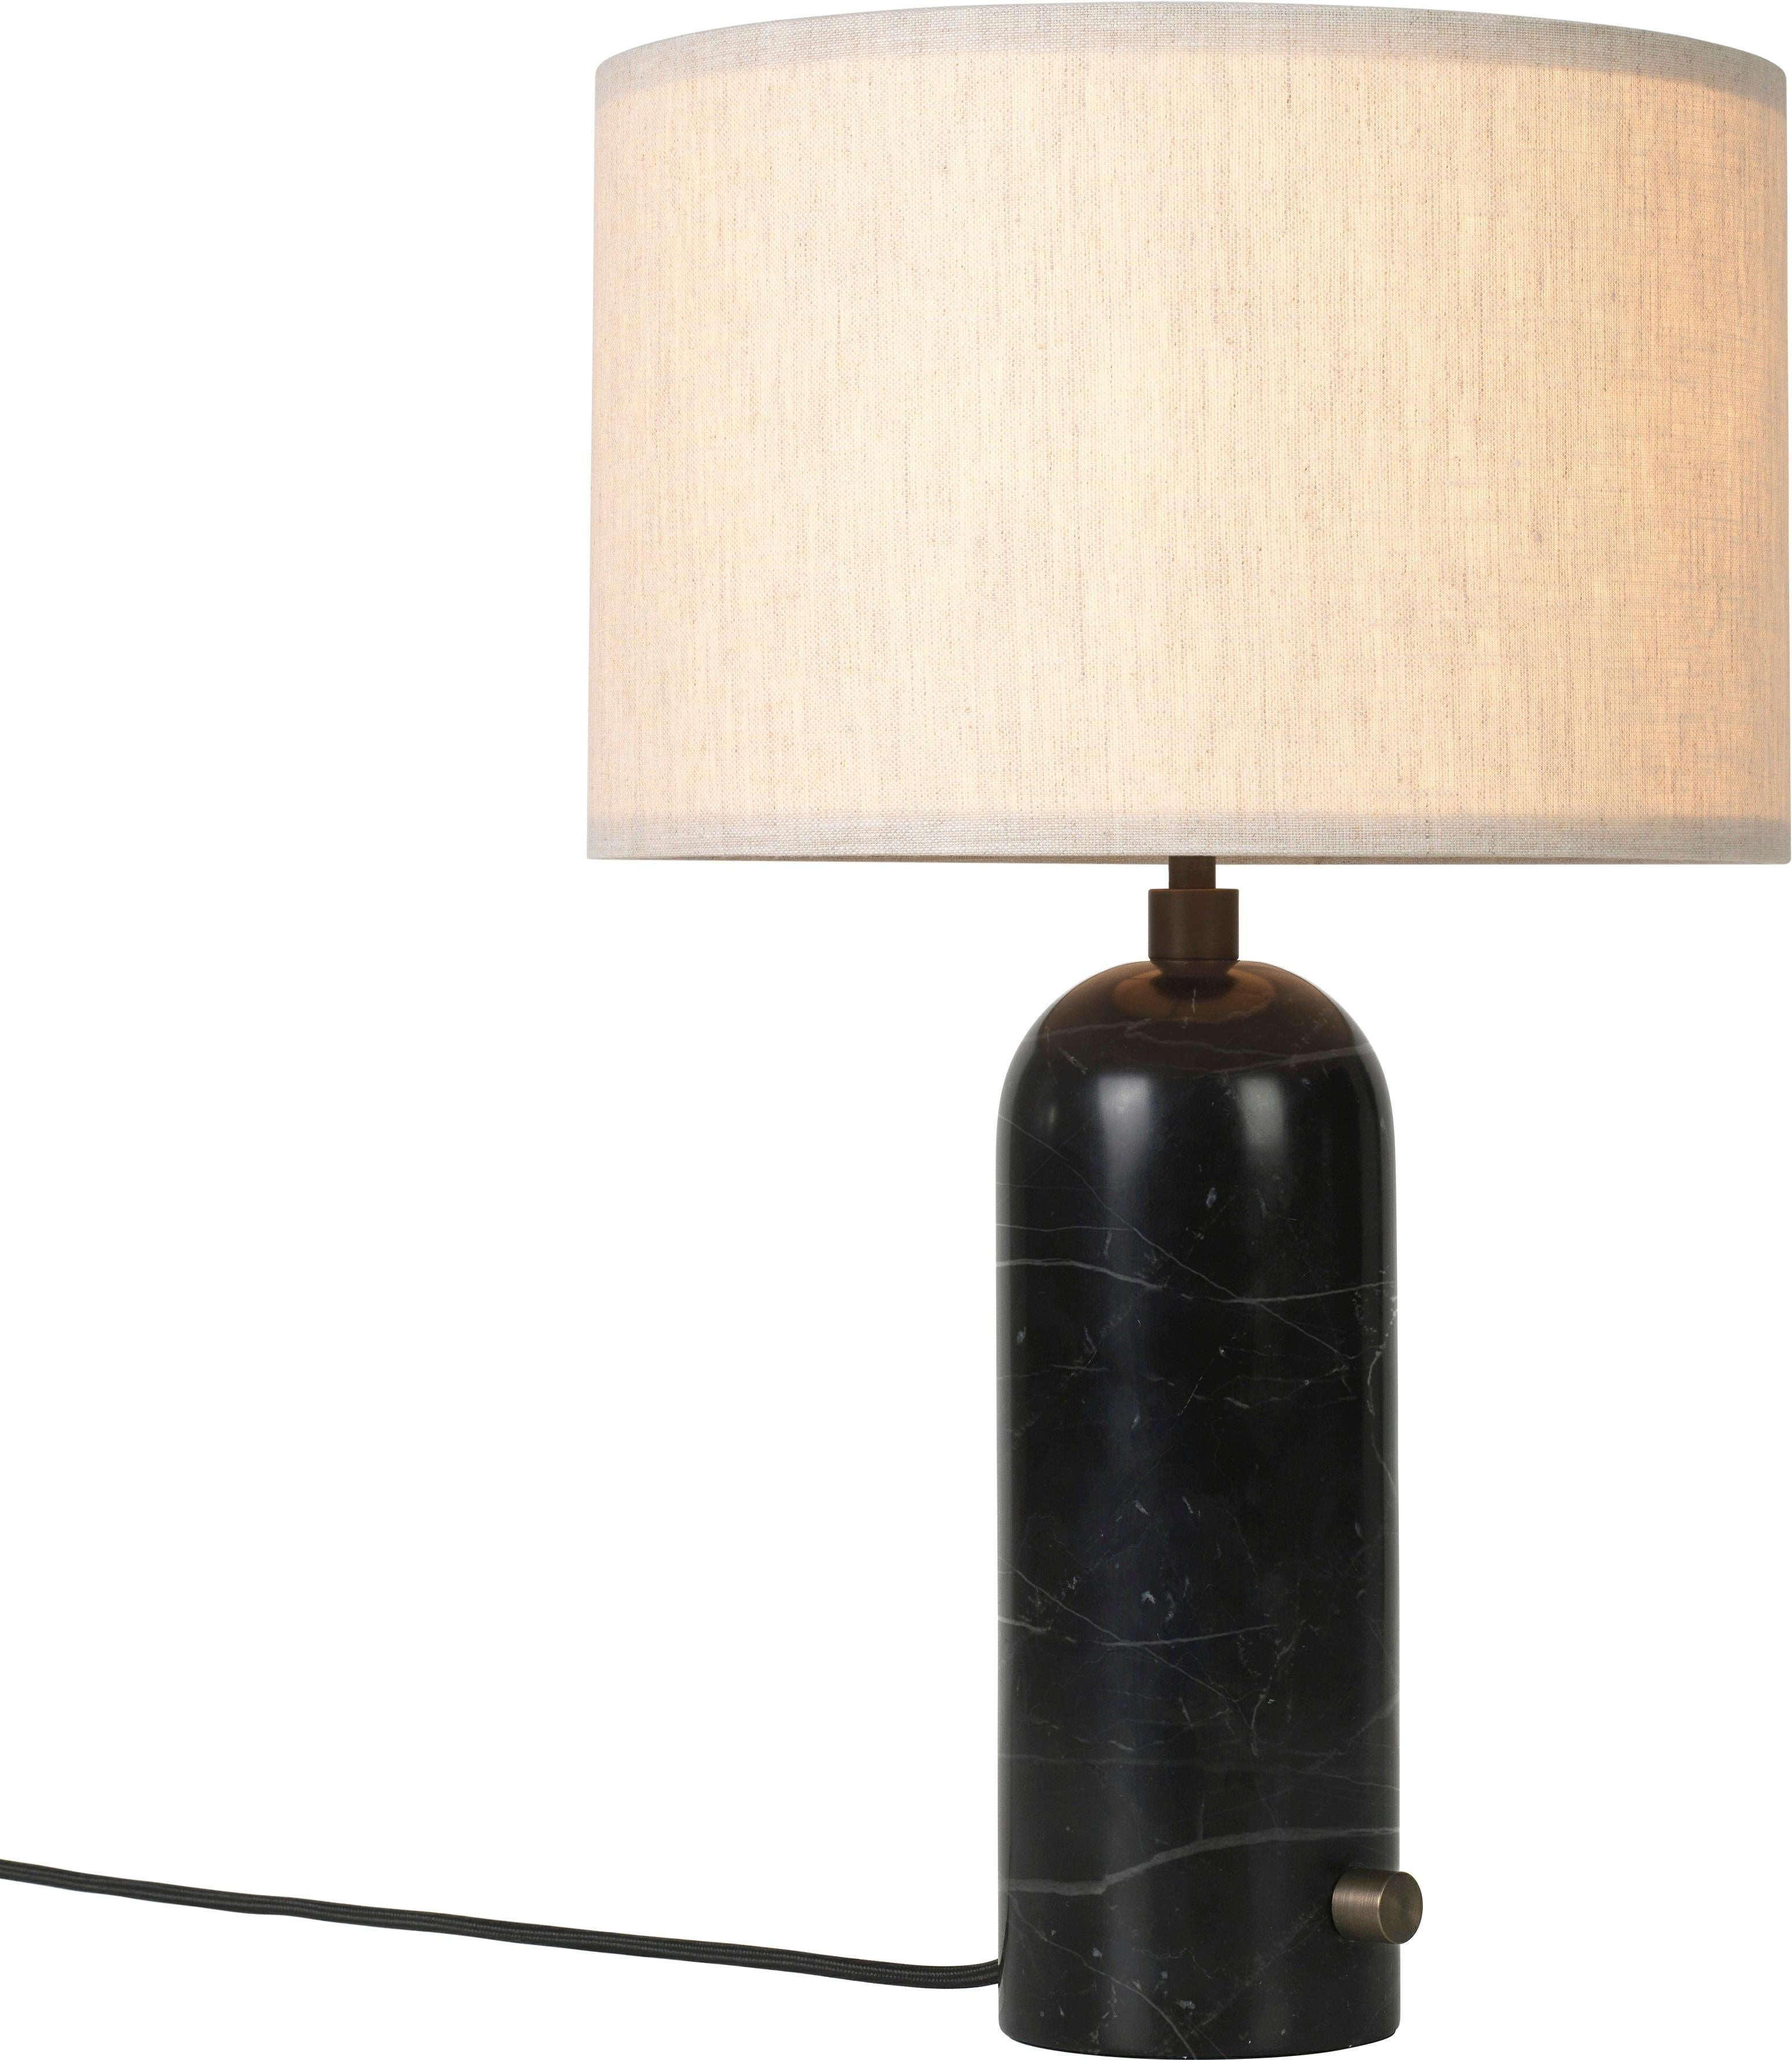 Small 'Gravity' marble table lamp by Space Copenhagen for Gubi in Black.

Executed in solid marble with a canvas or white textile shade perched atop its stem, the Gravity table lamp designed by Space Copenhagen for GUBI contrasts strength and